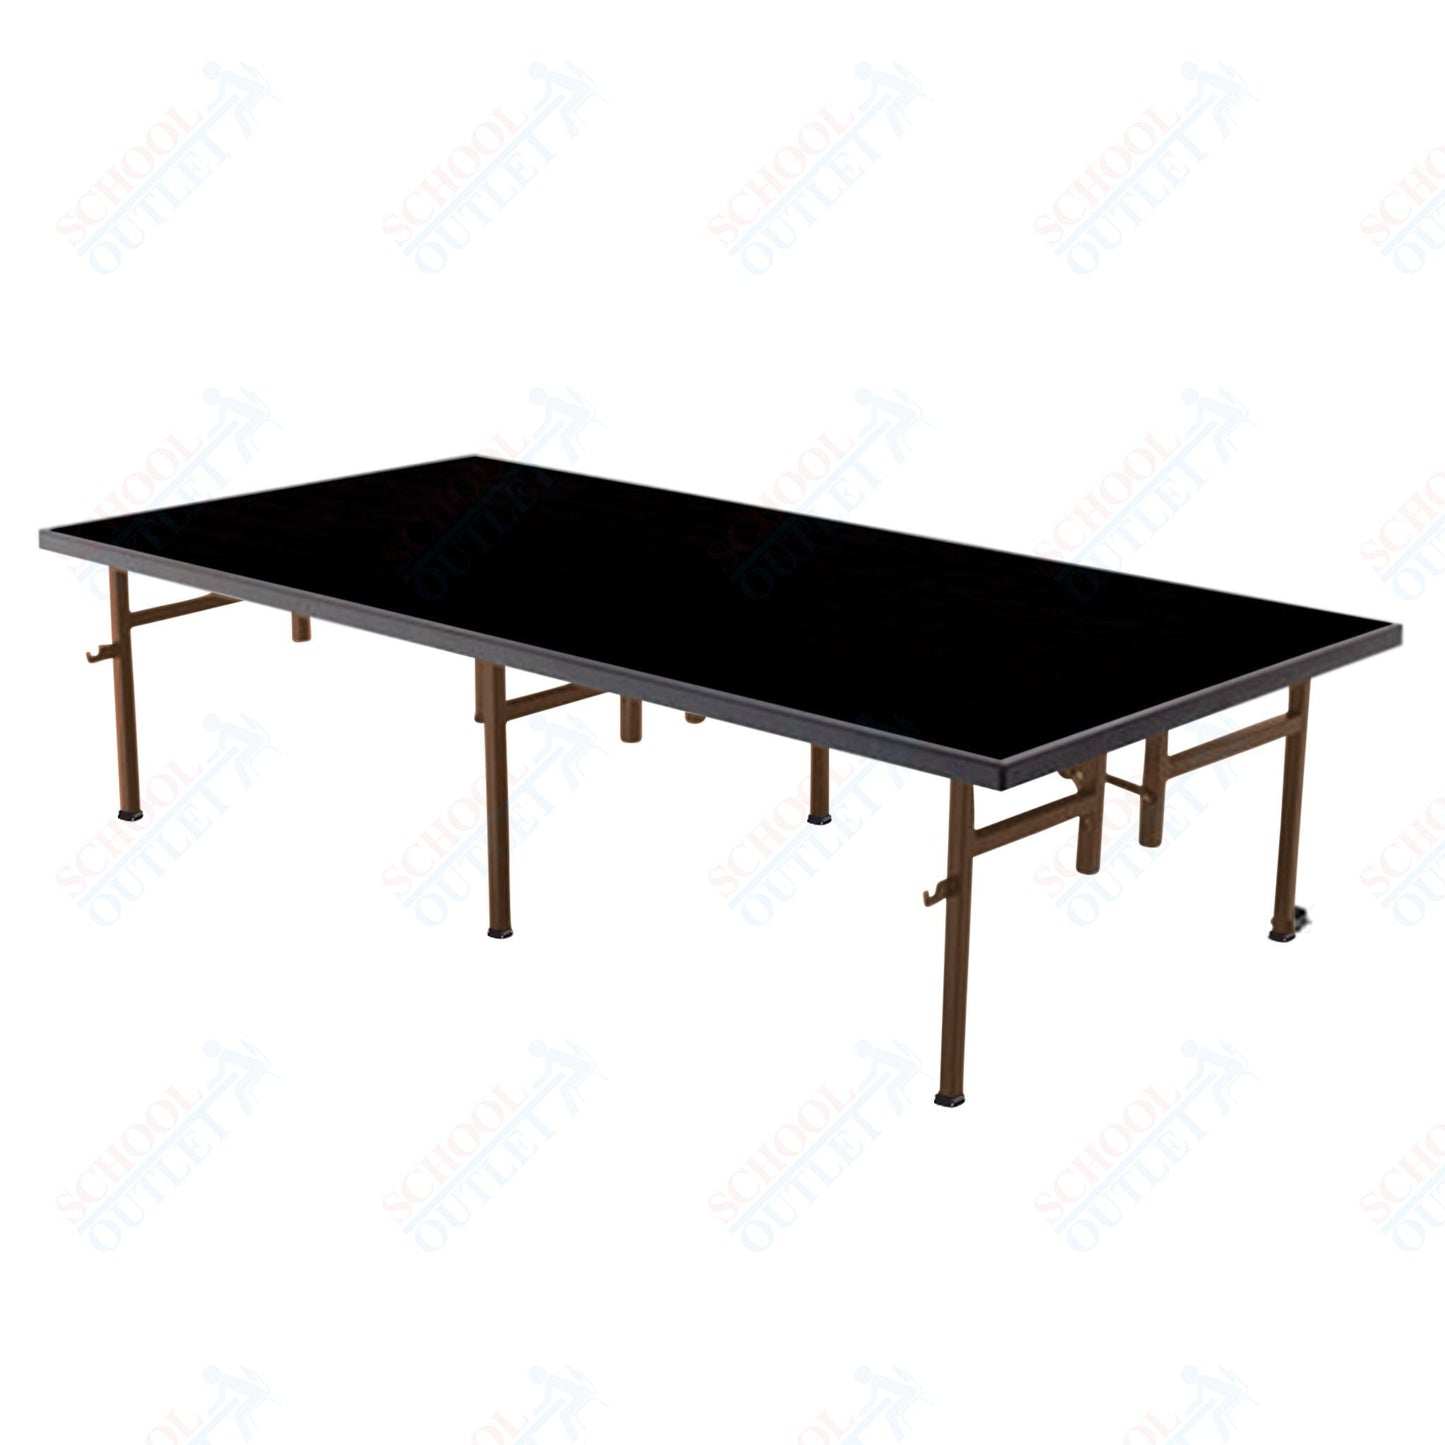 AmTab Fixed Height Stage - Polypropylene Top - 36"W x 48"L x 24"H (AmTab AMT - ST3424P) - SchoolOutlet